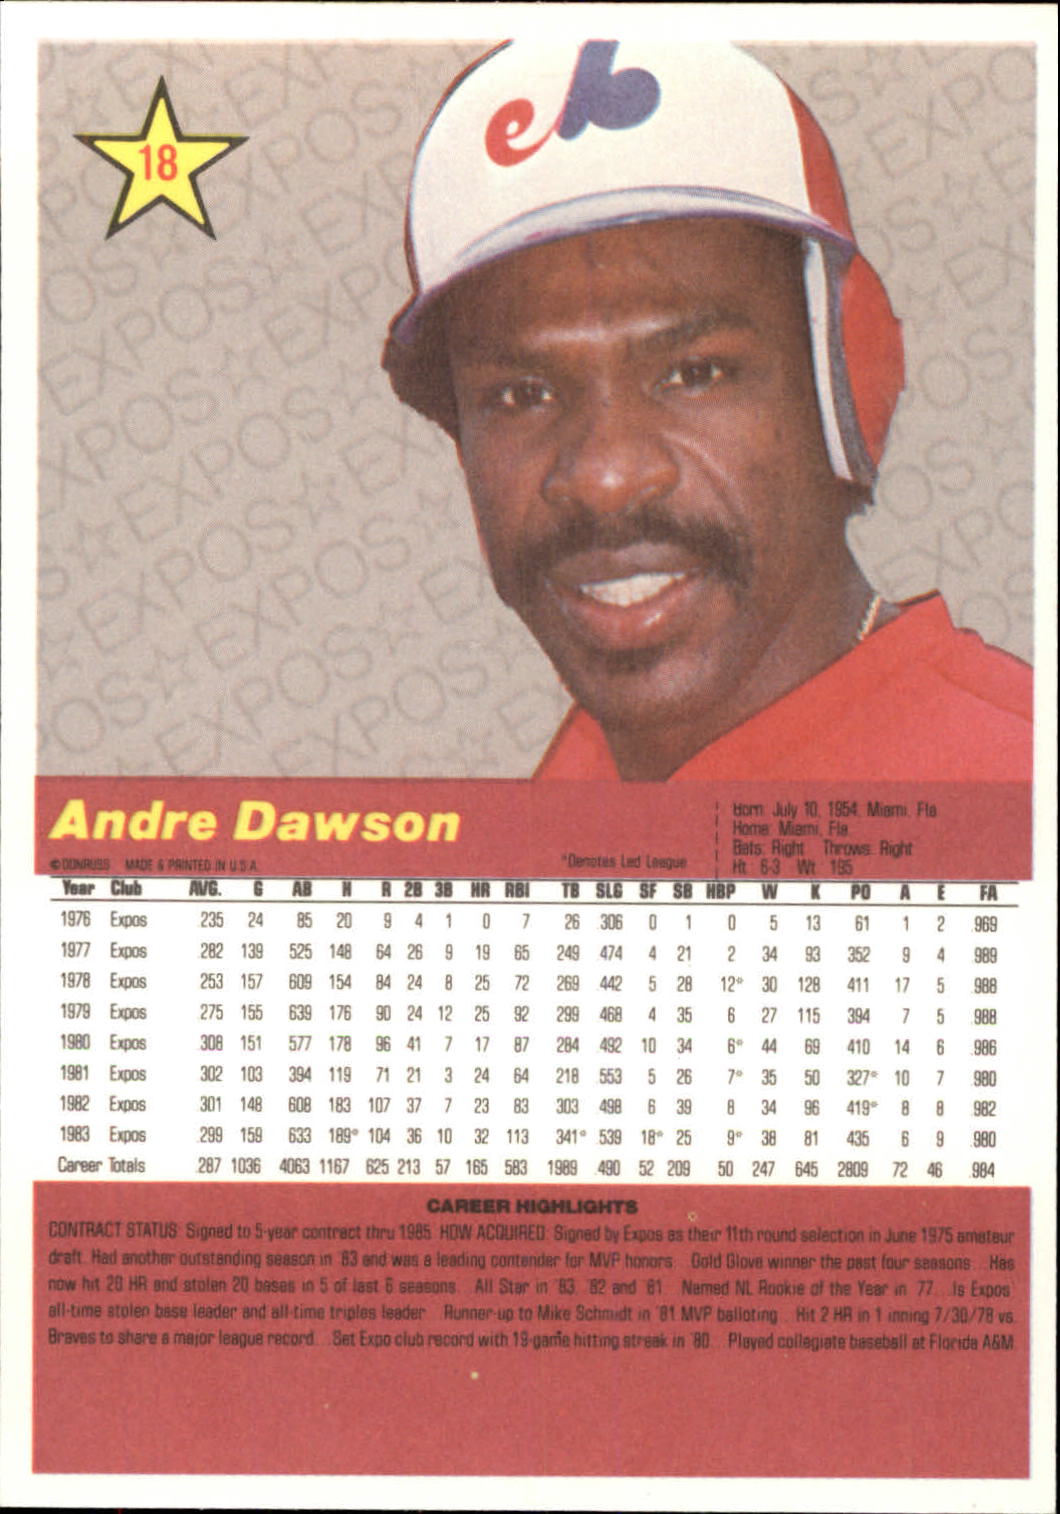 1984 Donruss Action All-Stars #18 Andre Dawson back image